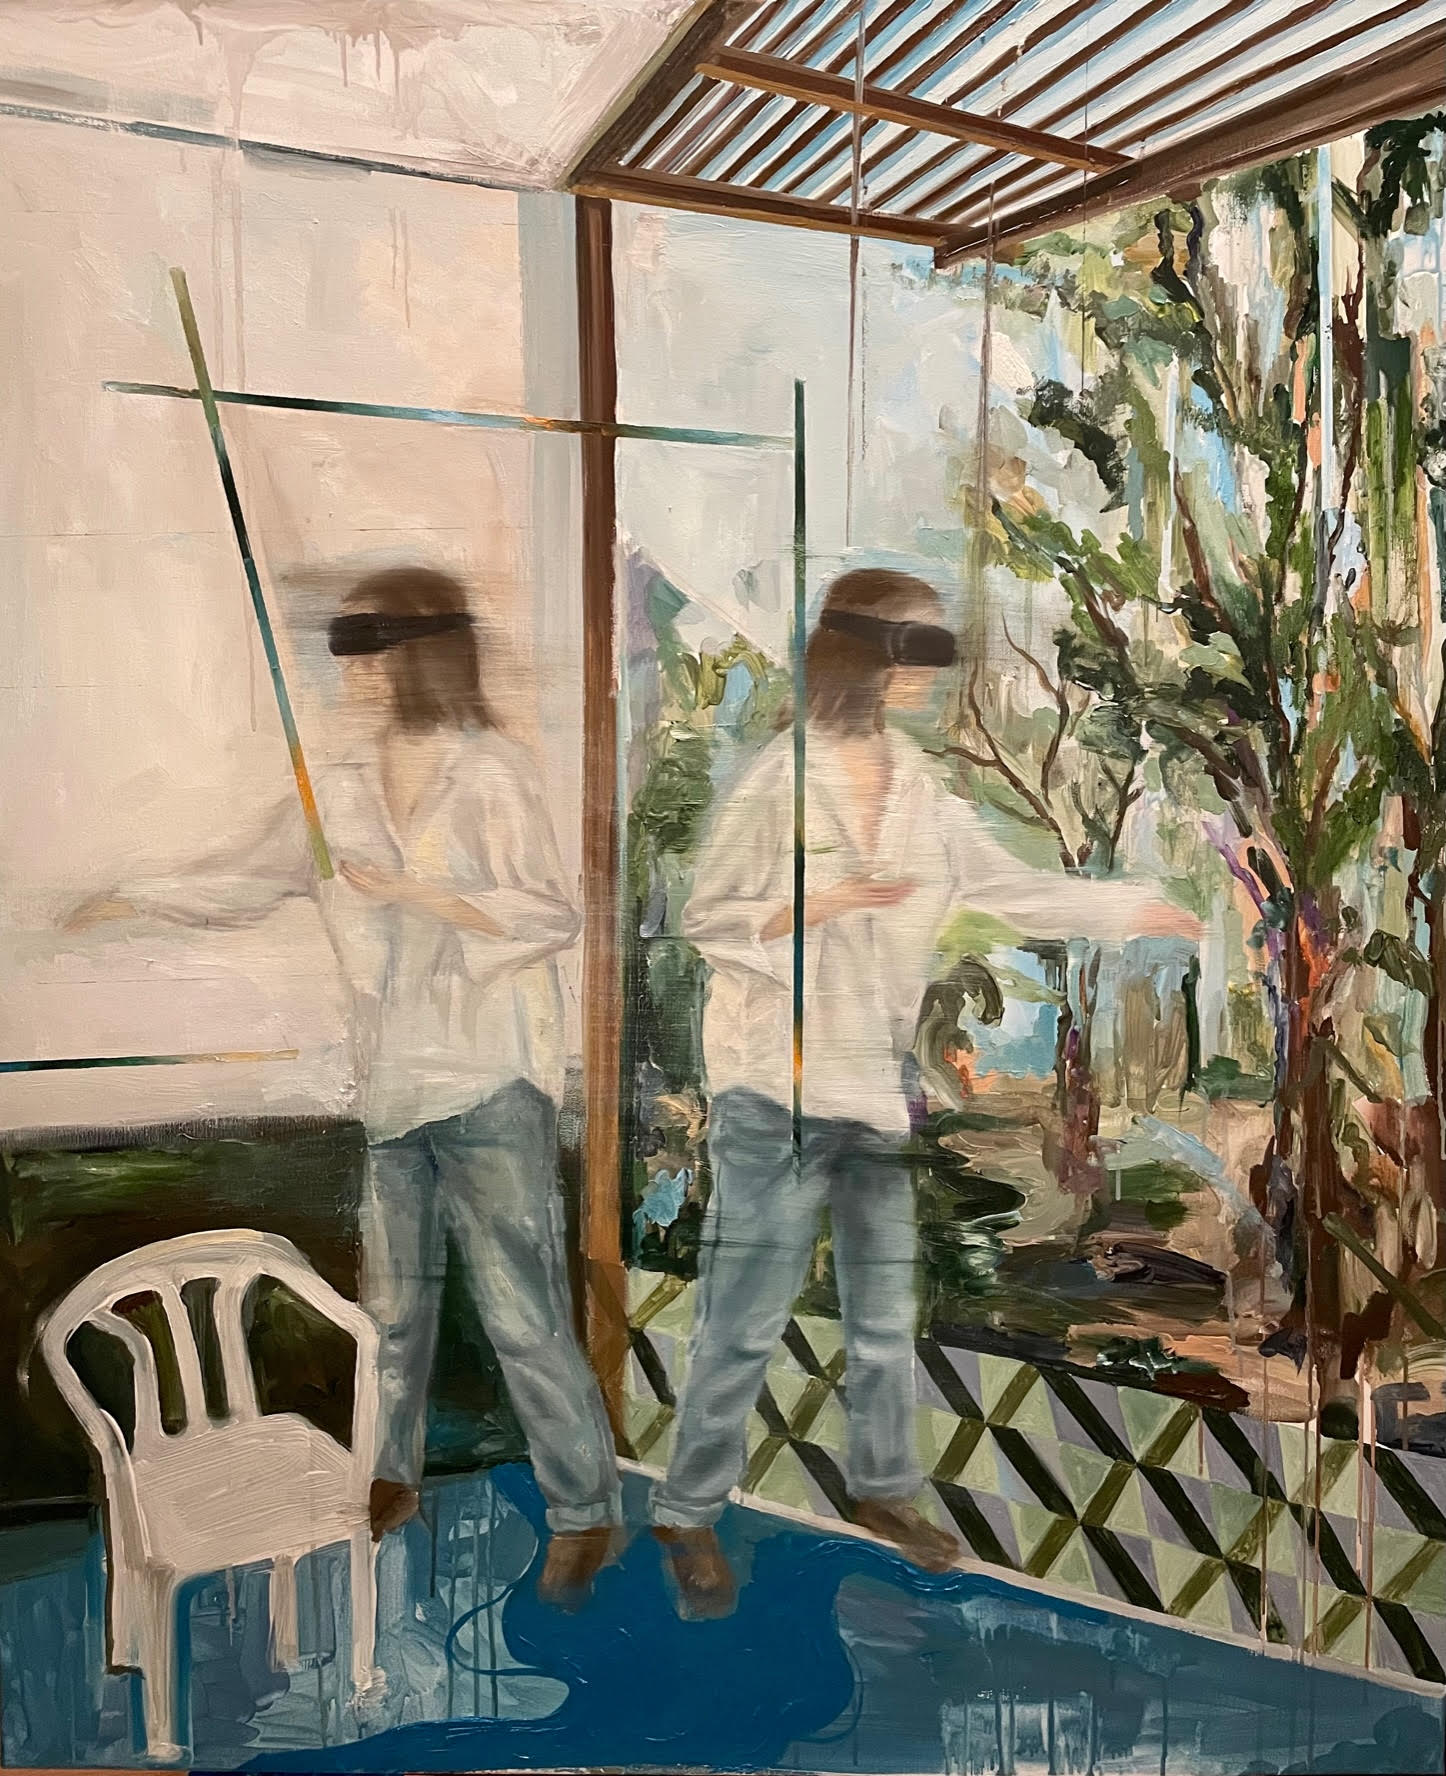 "Hide and seek", oil on canvas, 140x120cm